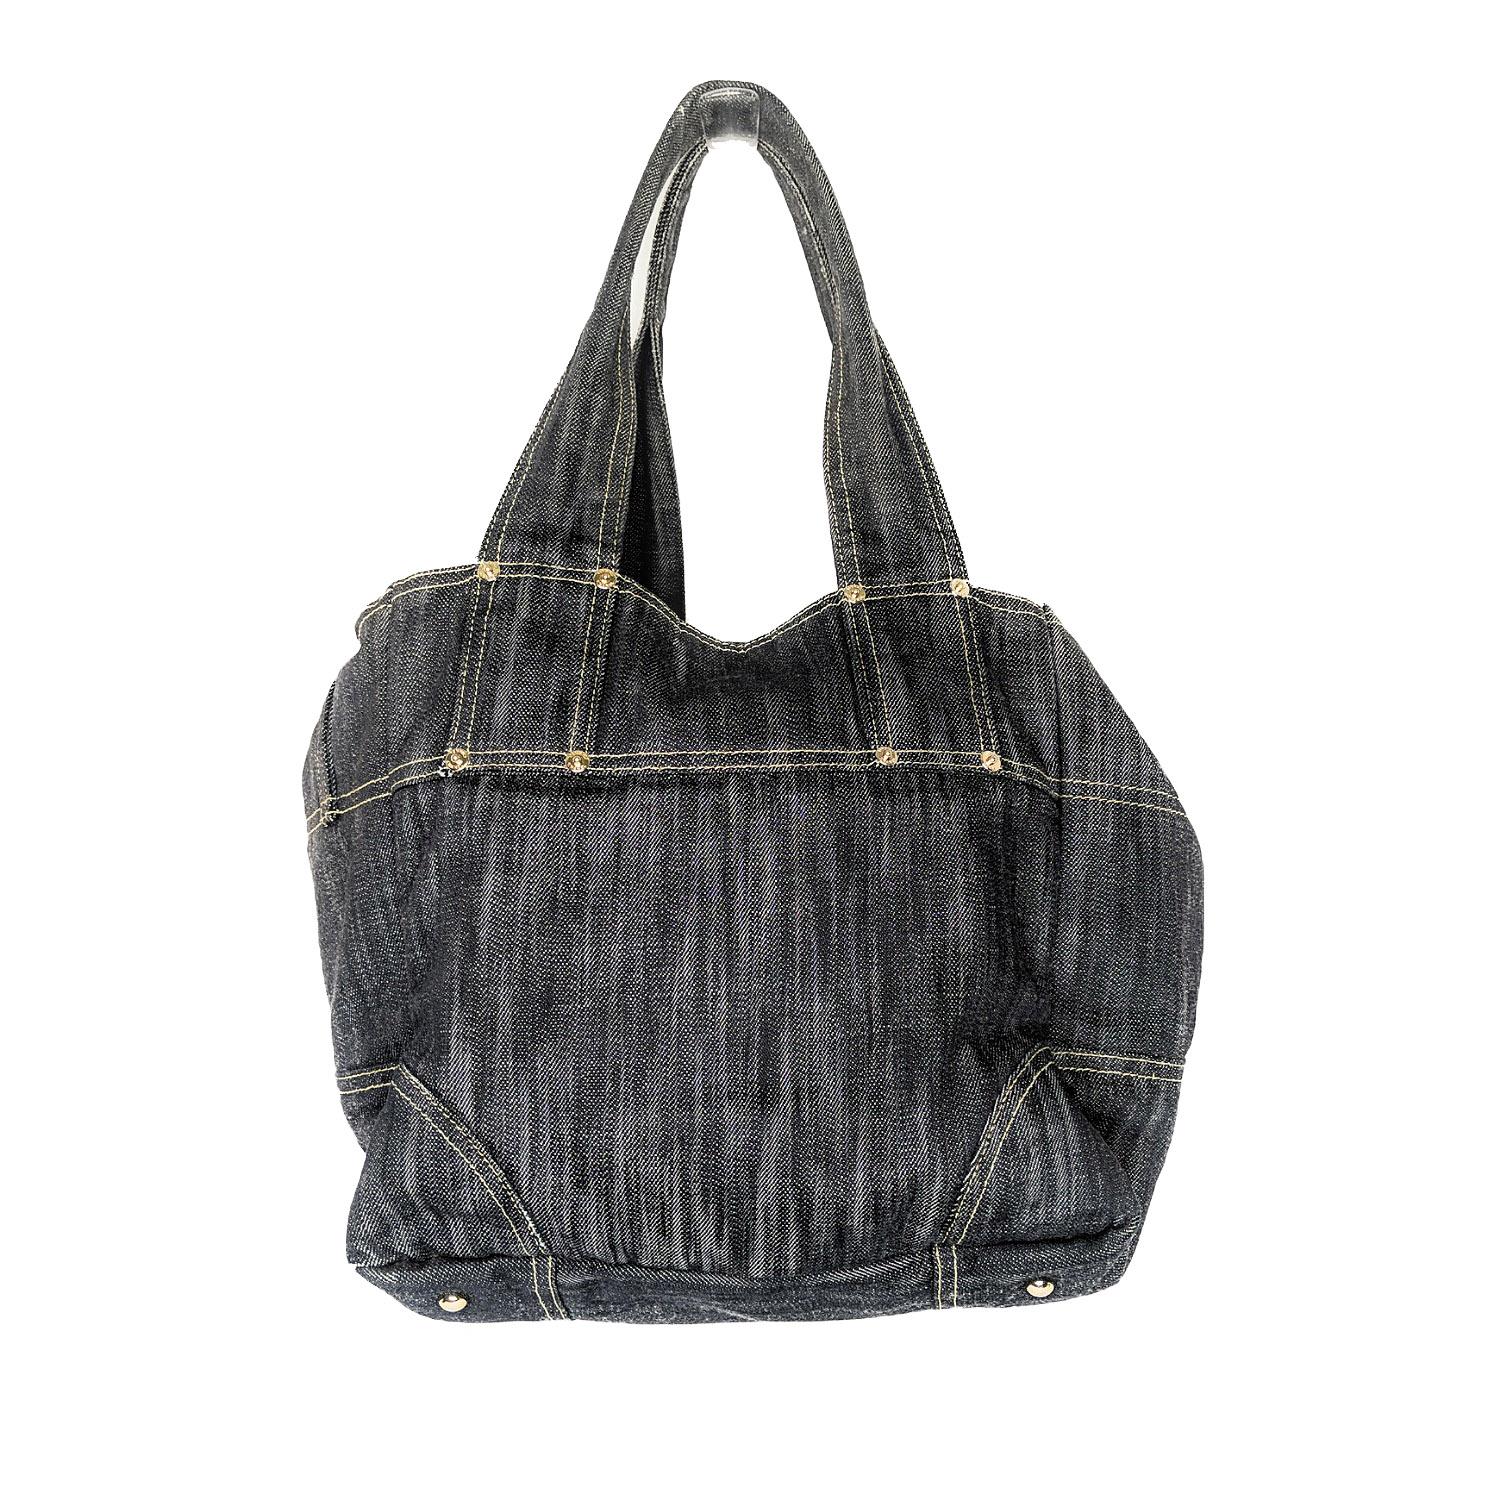 Blue dark wash denim Chanel tote bag with gold-tone hardware, dual flat shoulder straps featuring button embellishments, contrast stitching throughout, CC accents at front, tonal denim interior, five slip pockets at interior wall and dual snap